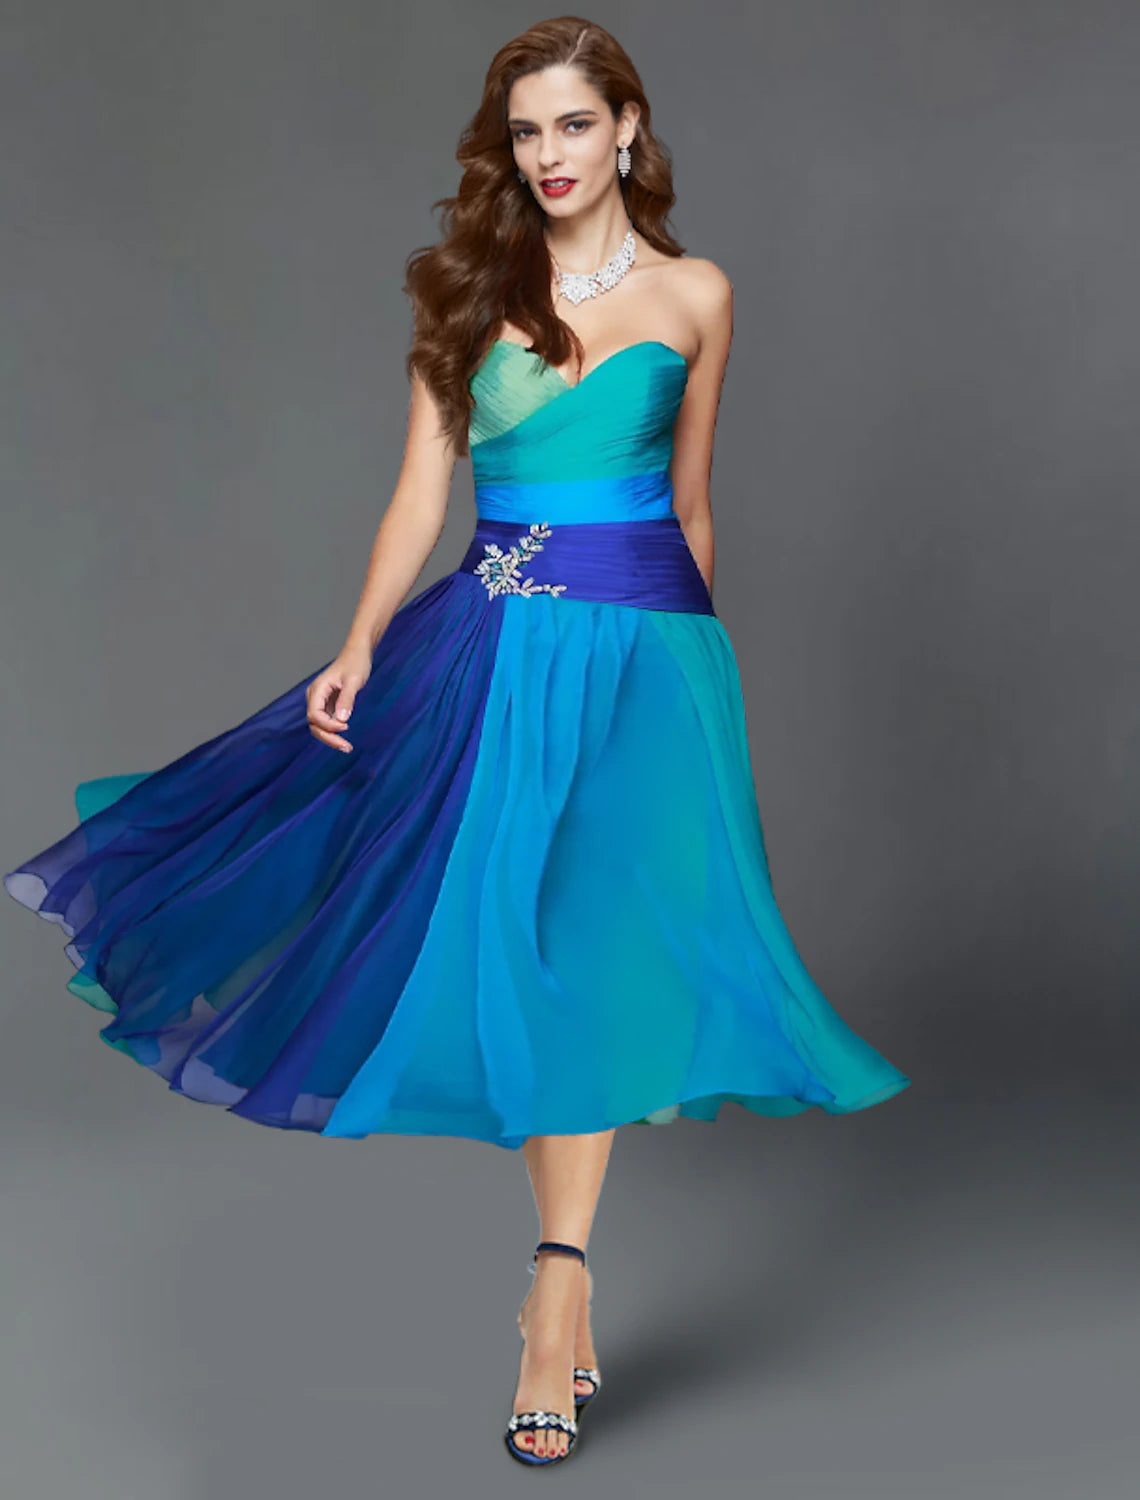 A-Line Wedding Guest Dresses Color Block Dress Summer Tea Length Short Sleeve Strapless Chiffon with Ruched